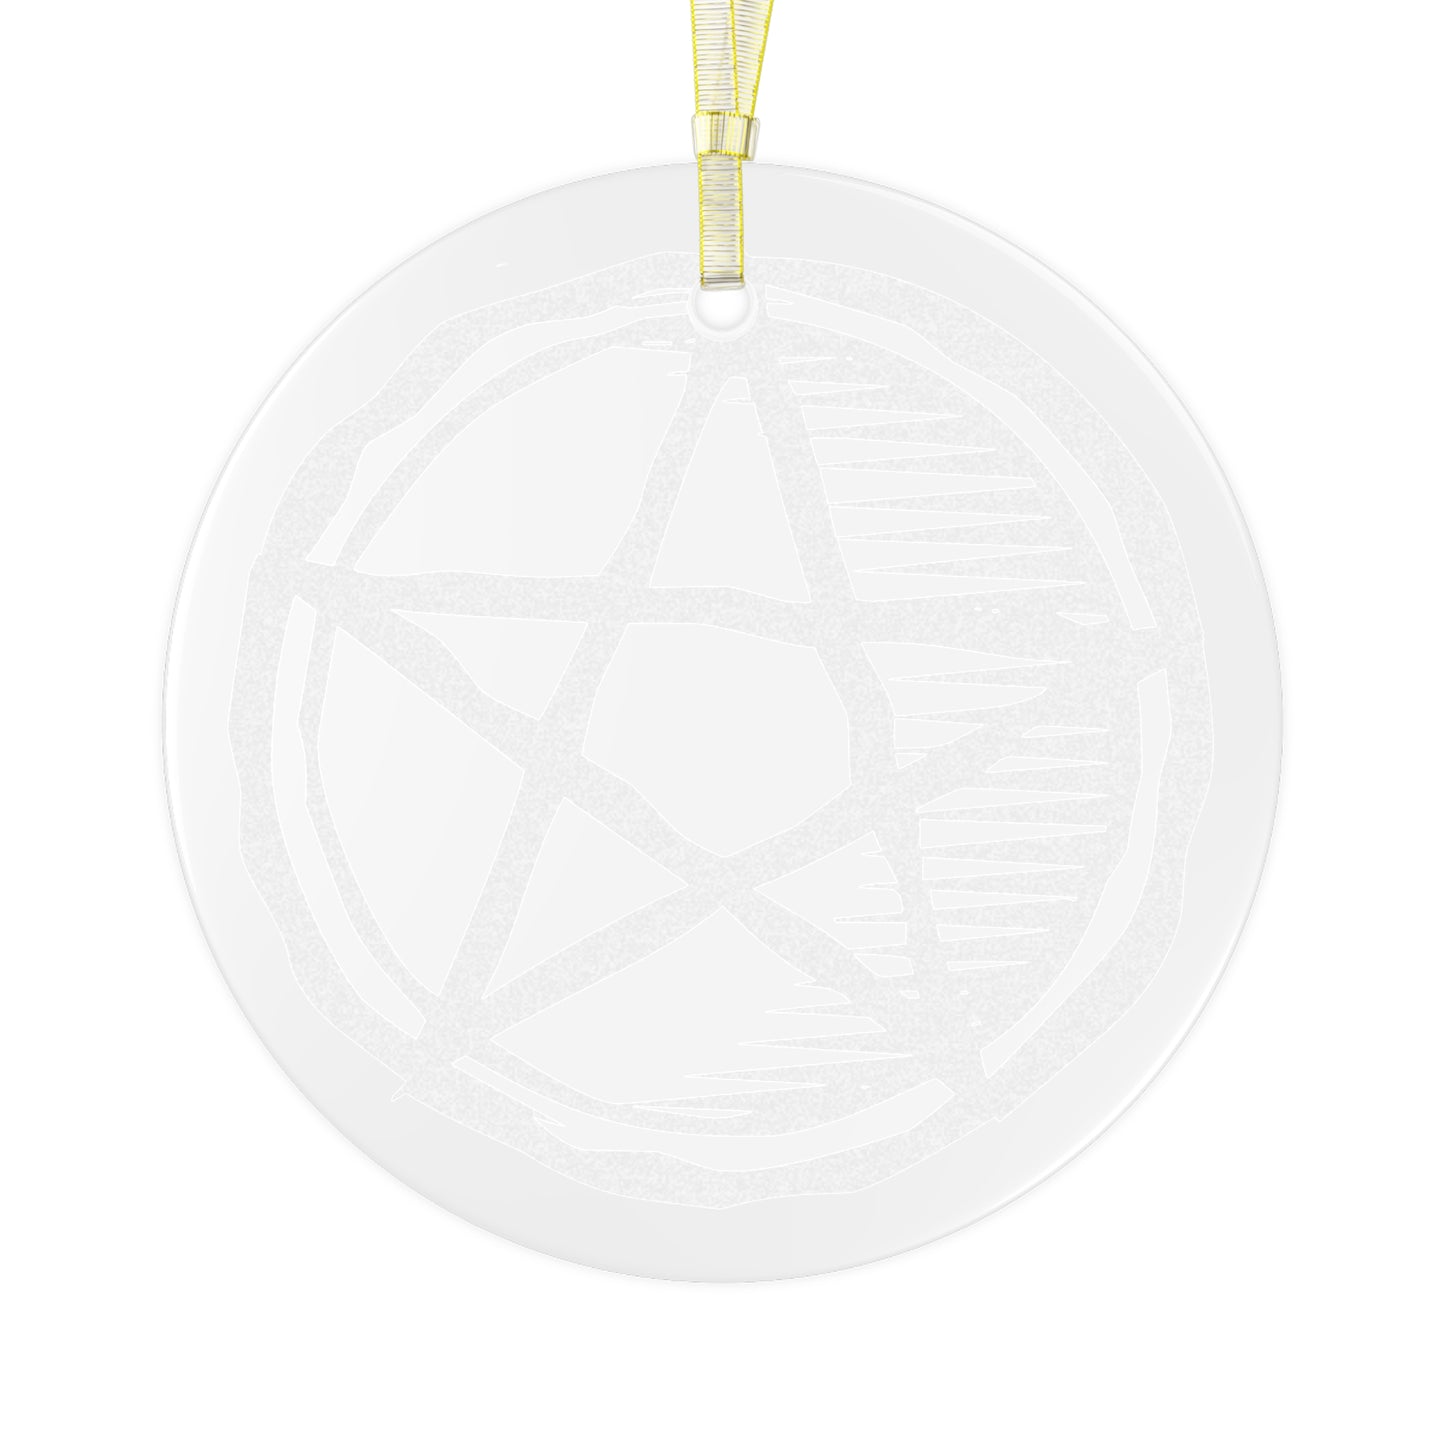 Glass Pentagram Ornament - Yule Ornament - Christmas Ornament - Ornament for Tree Winter Solstice - Pagan, Witch, Witchcraft